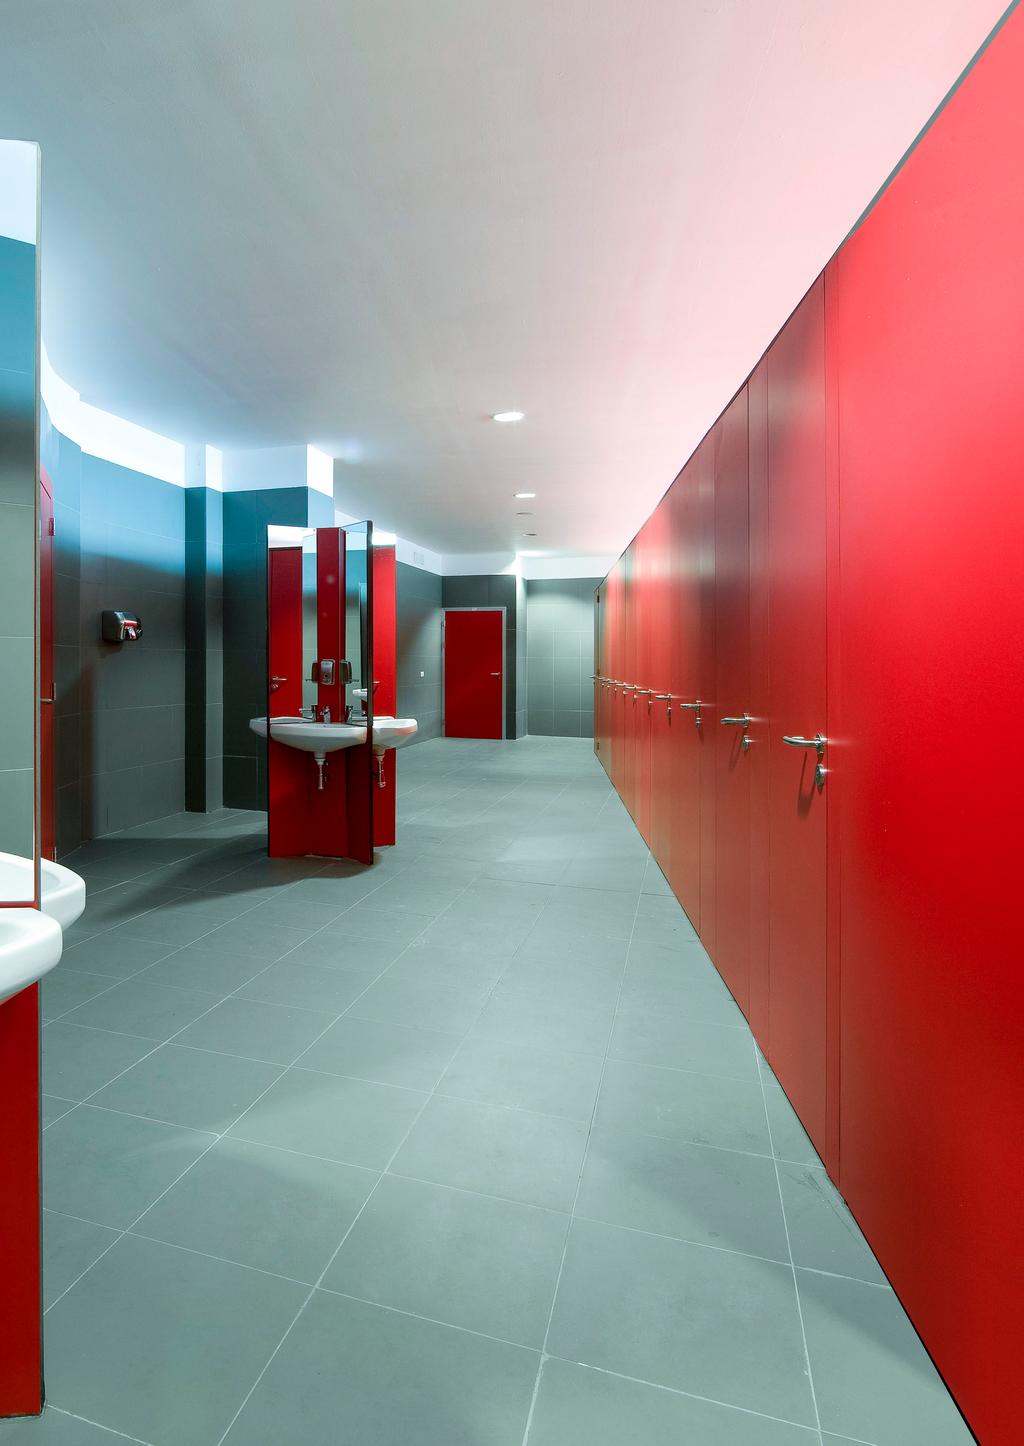 WASHROOMS WE VE GOT IT COVERED To enhance our classic sizes with a solution that meets the design and legislation requirements of full-height and deeper washroom cubicles, Formica Group is